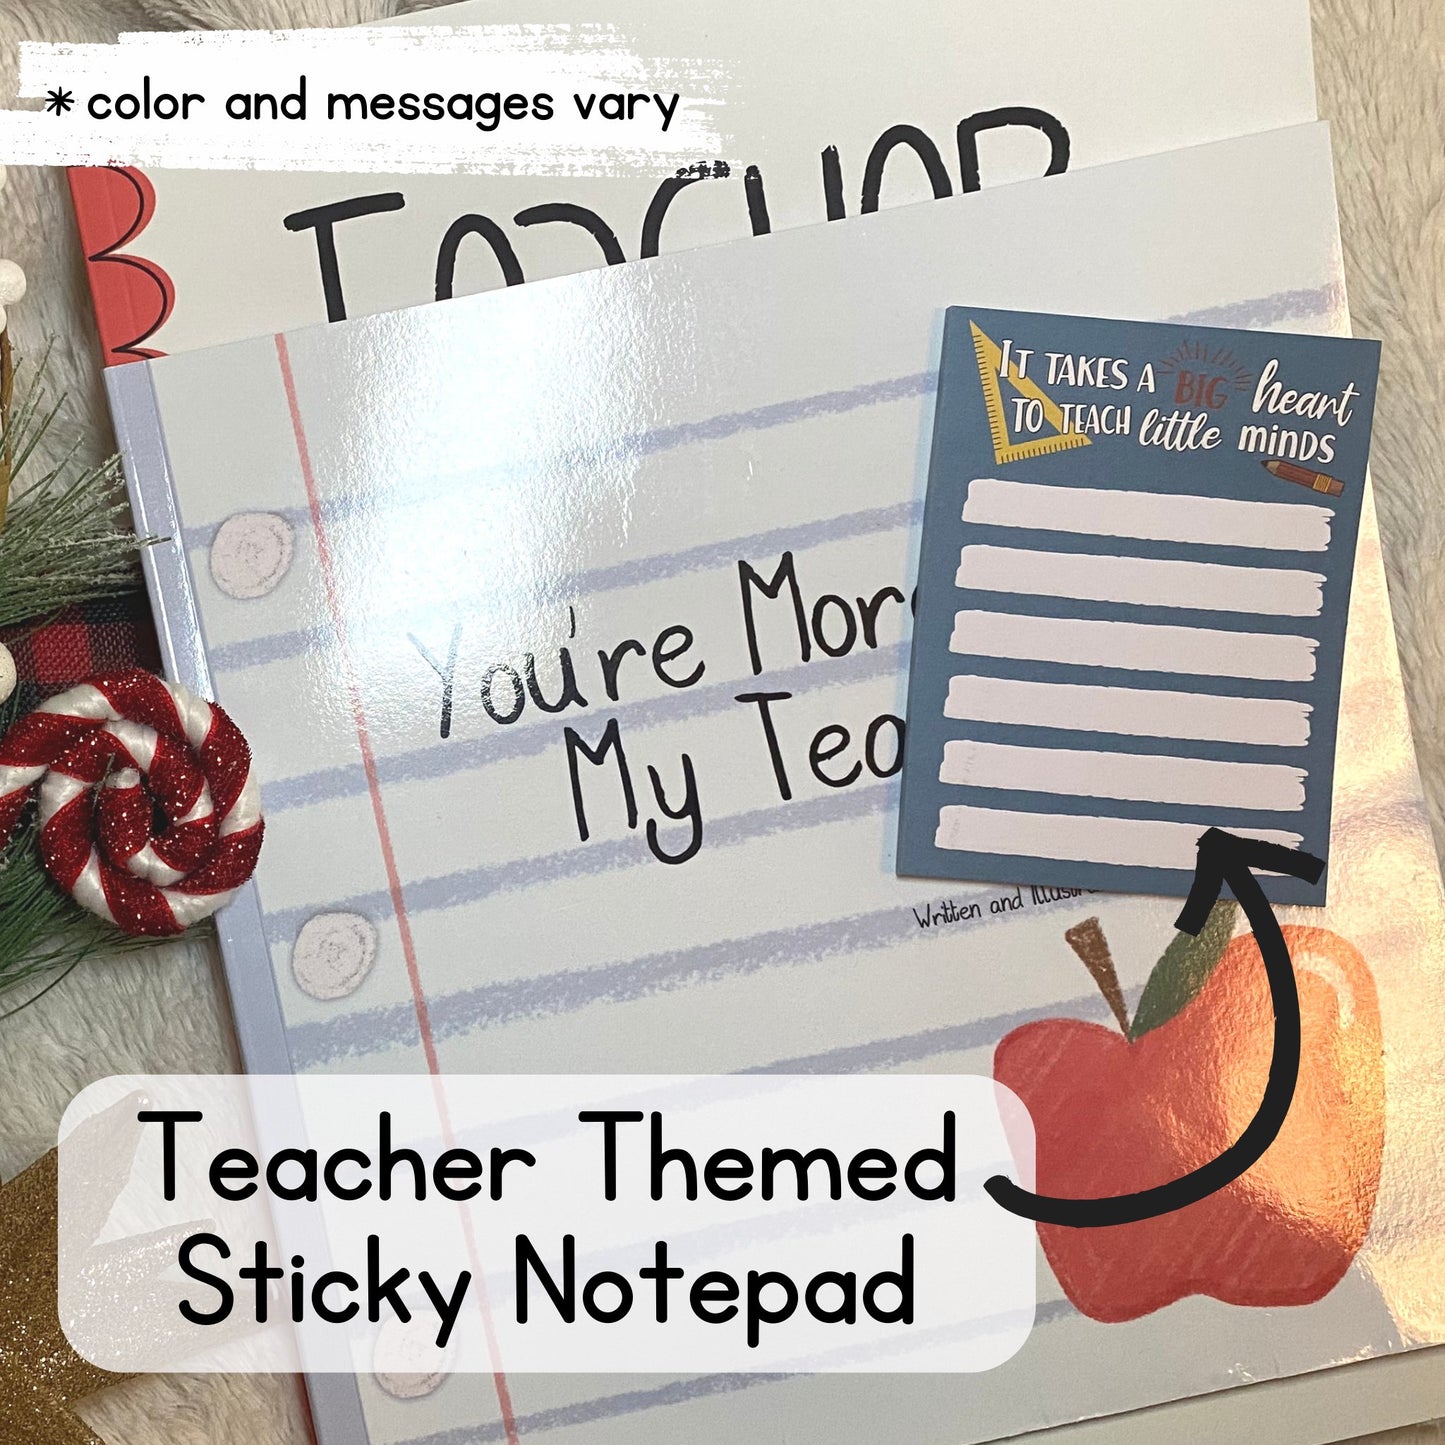 Image of the teacher themed sticky notepad included in the teacher gift set self published through Amazon KDP and Kindle Direct Publishing that includes a personalized copy of "You're More Than My Teacher."